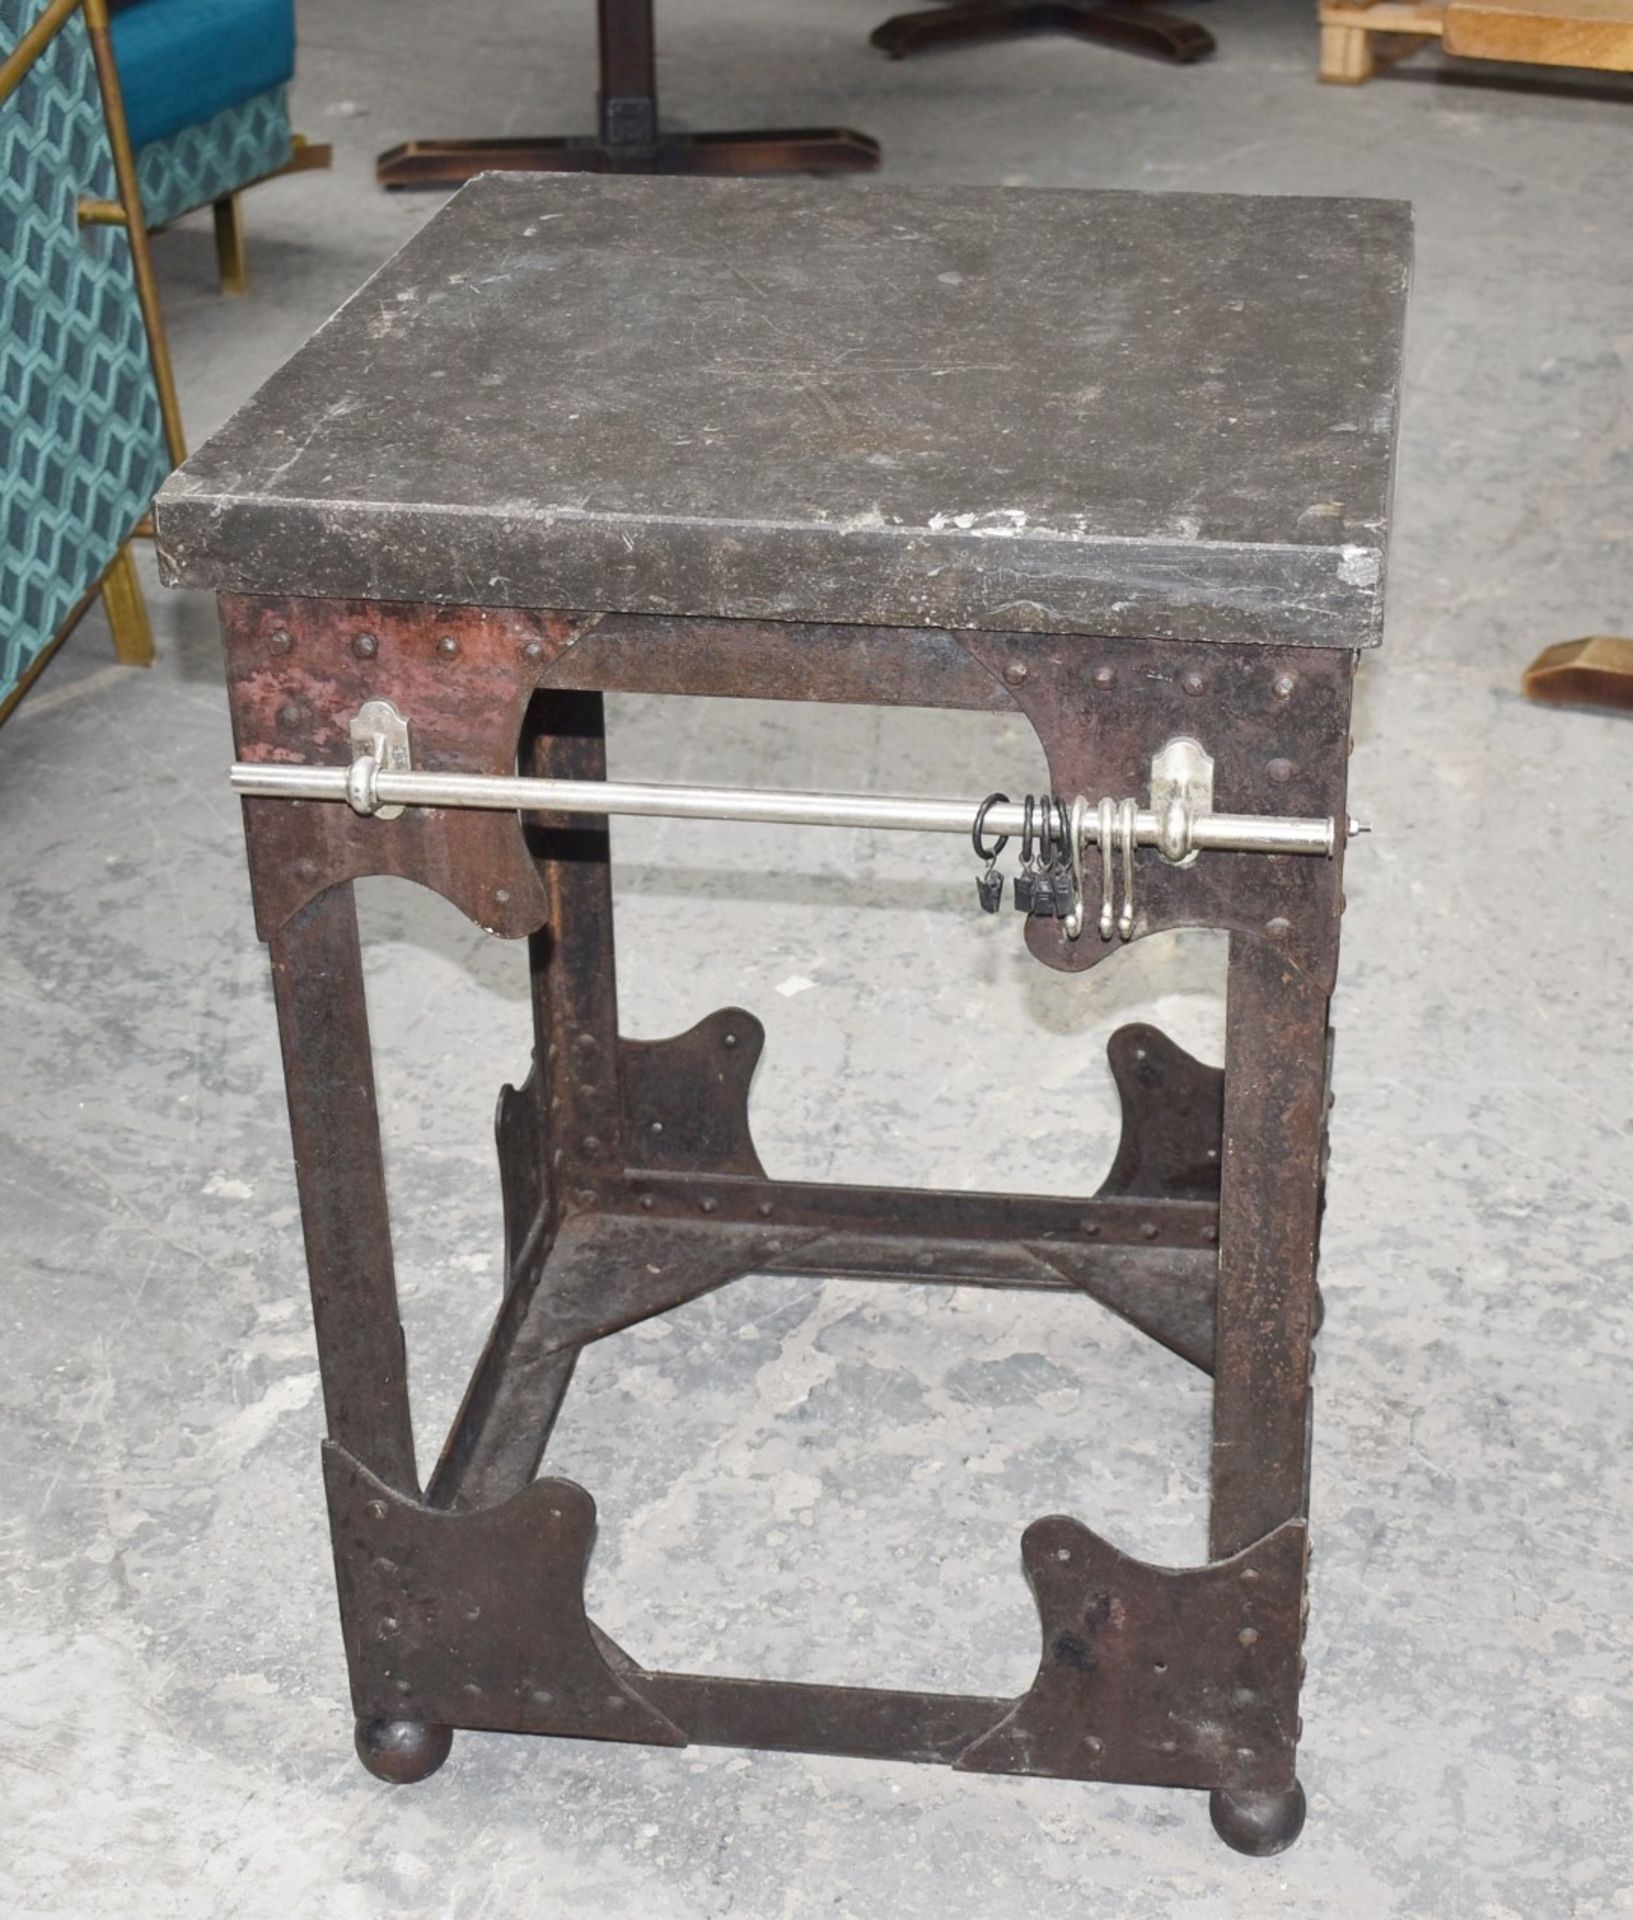 1 x Vintage Butchers Block With Riveted Steel Base, Utensil Hanging Rail and Heavy Stone Block Top